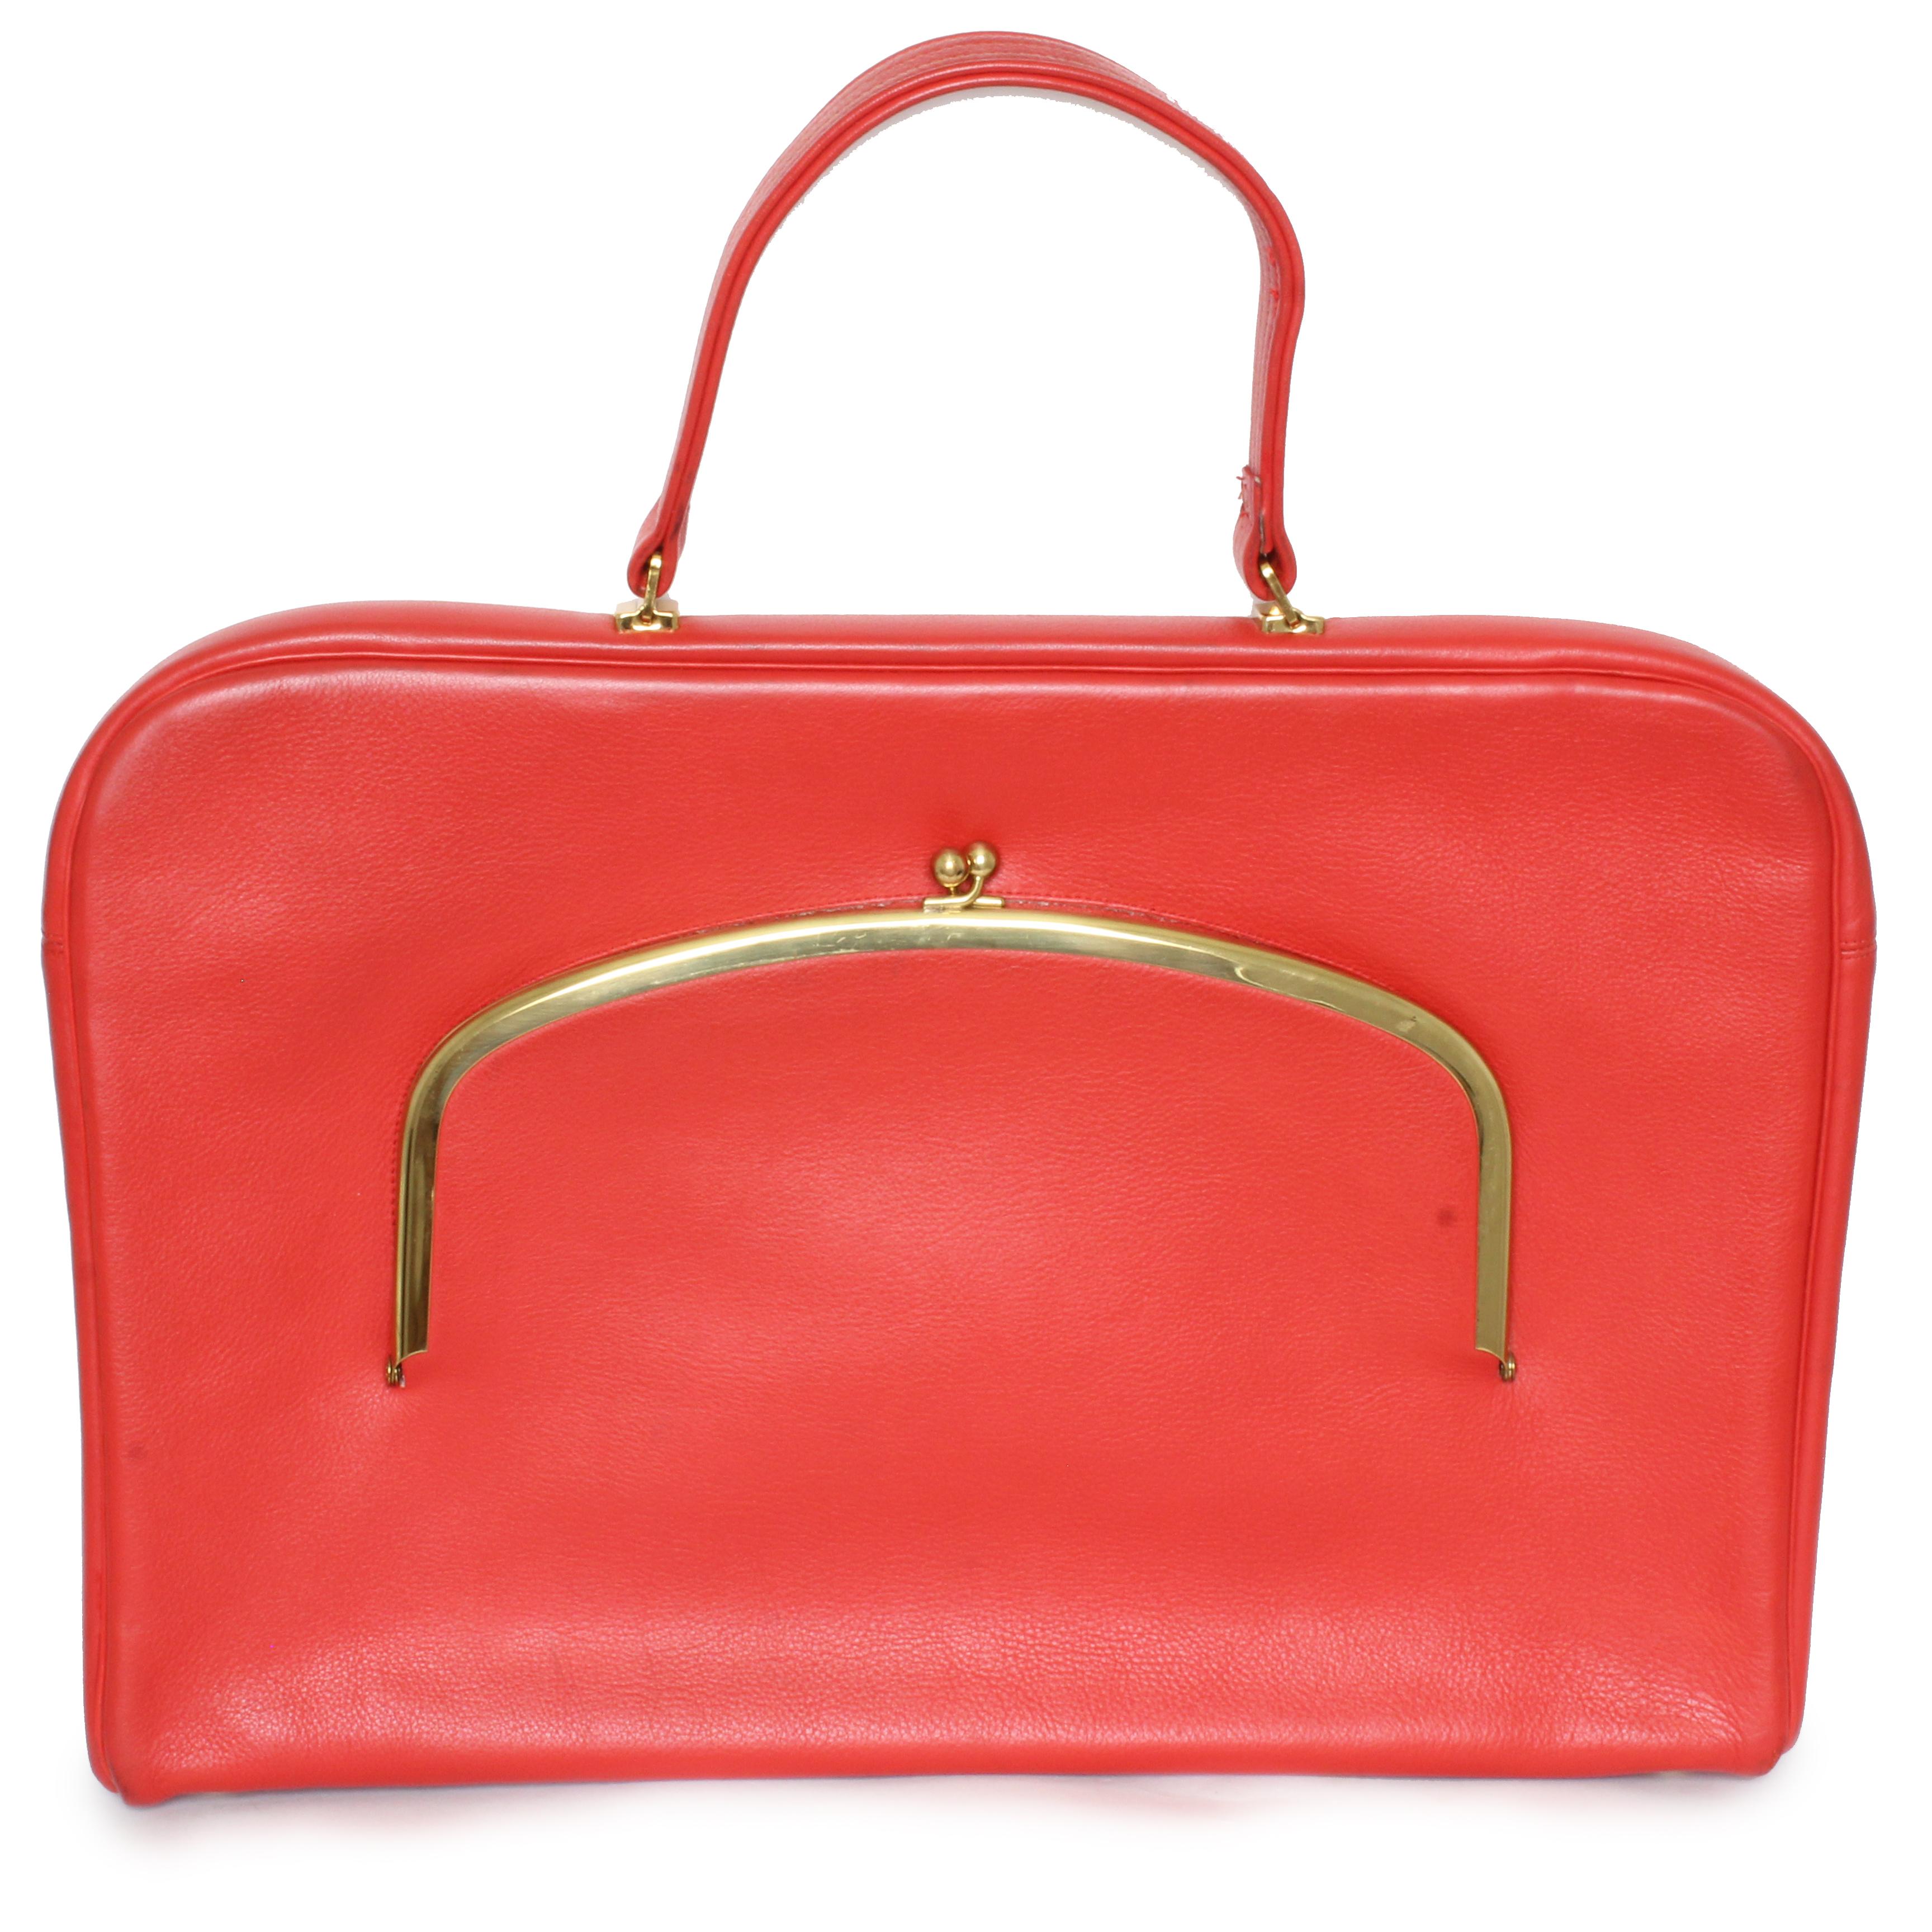 Bonnie Cashin for Coach Attache Bag Red Leather Briefcase Cashin Carry 60s  In Good Condition For Sale In Port Saint Lucie, FL